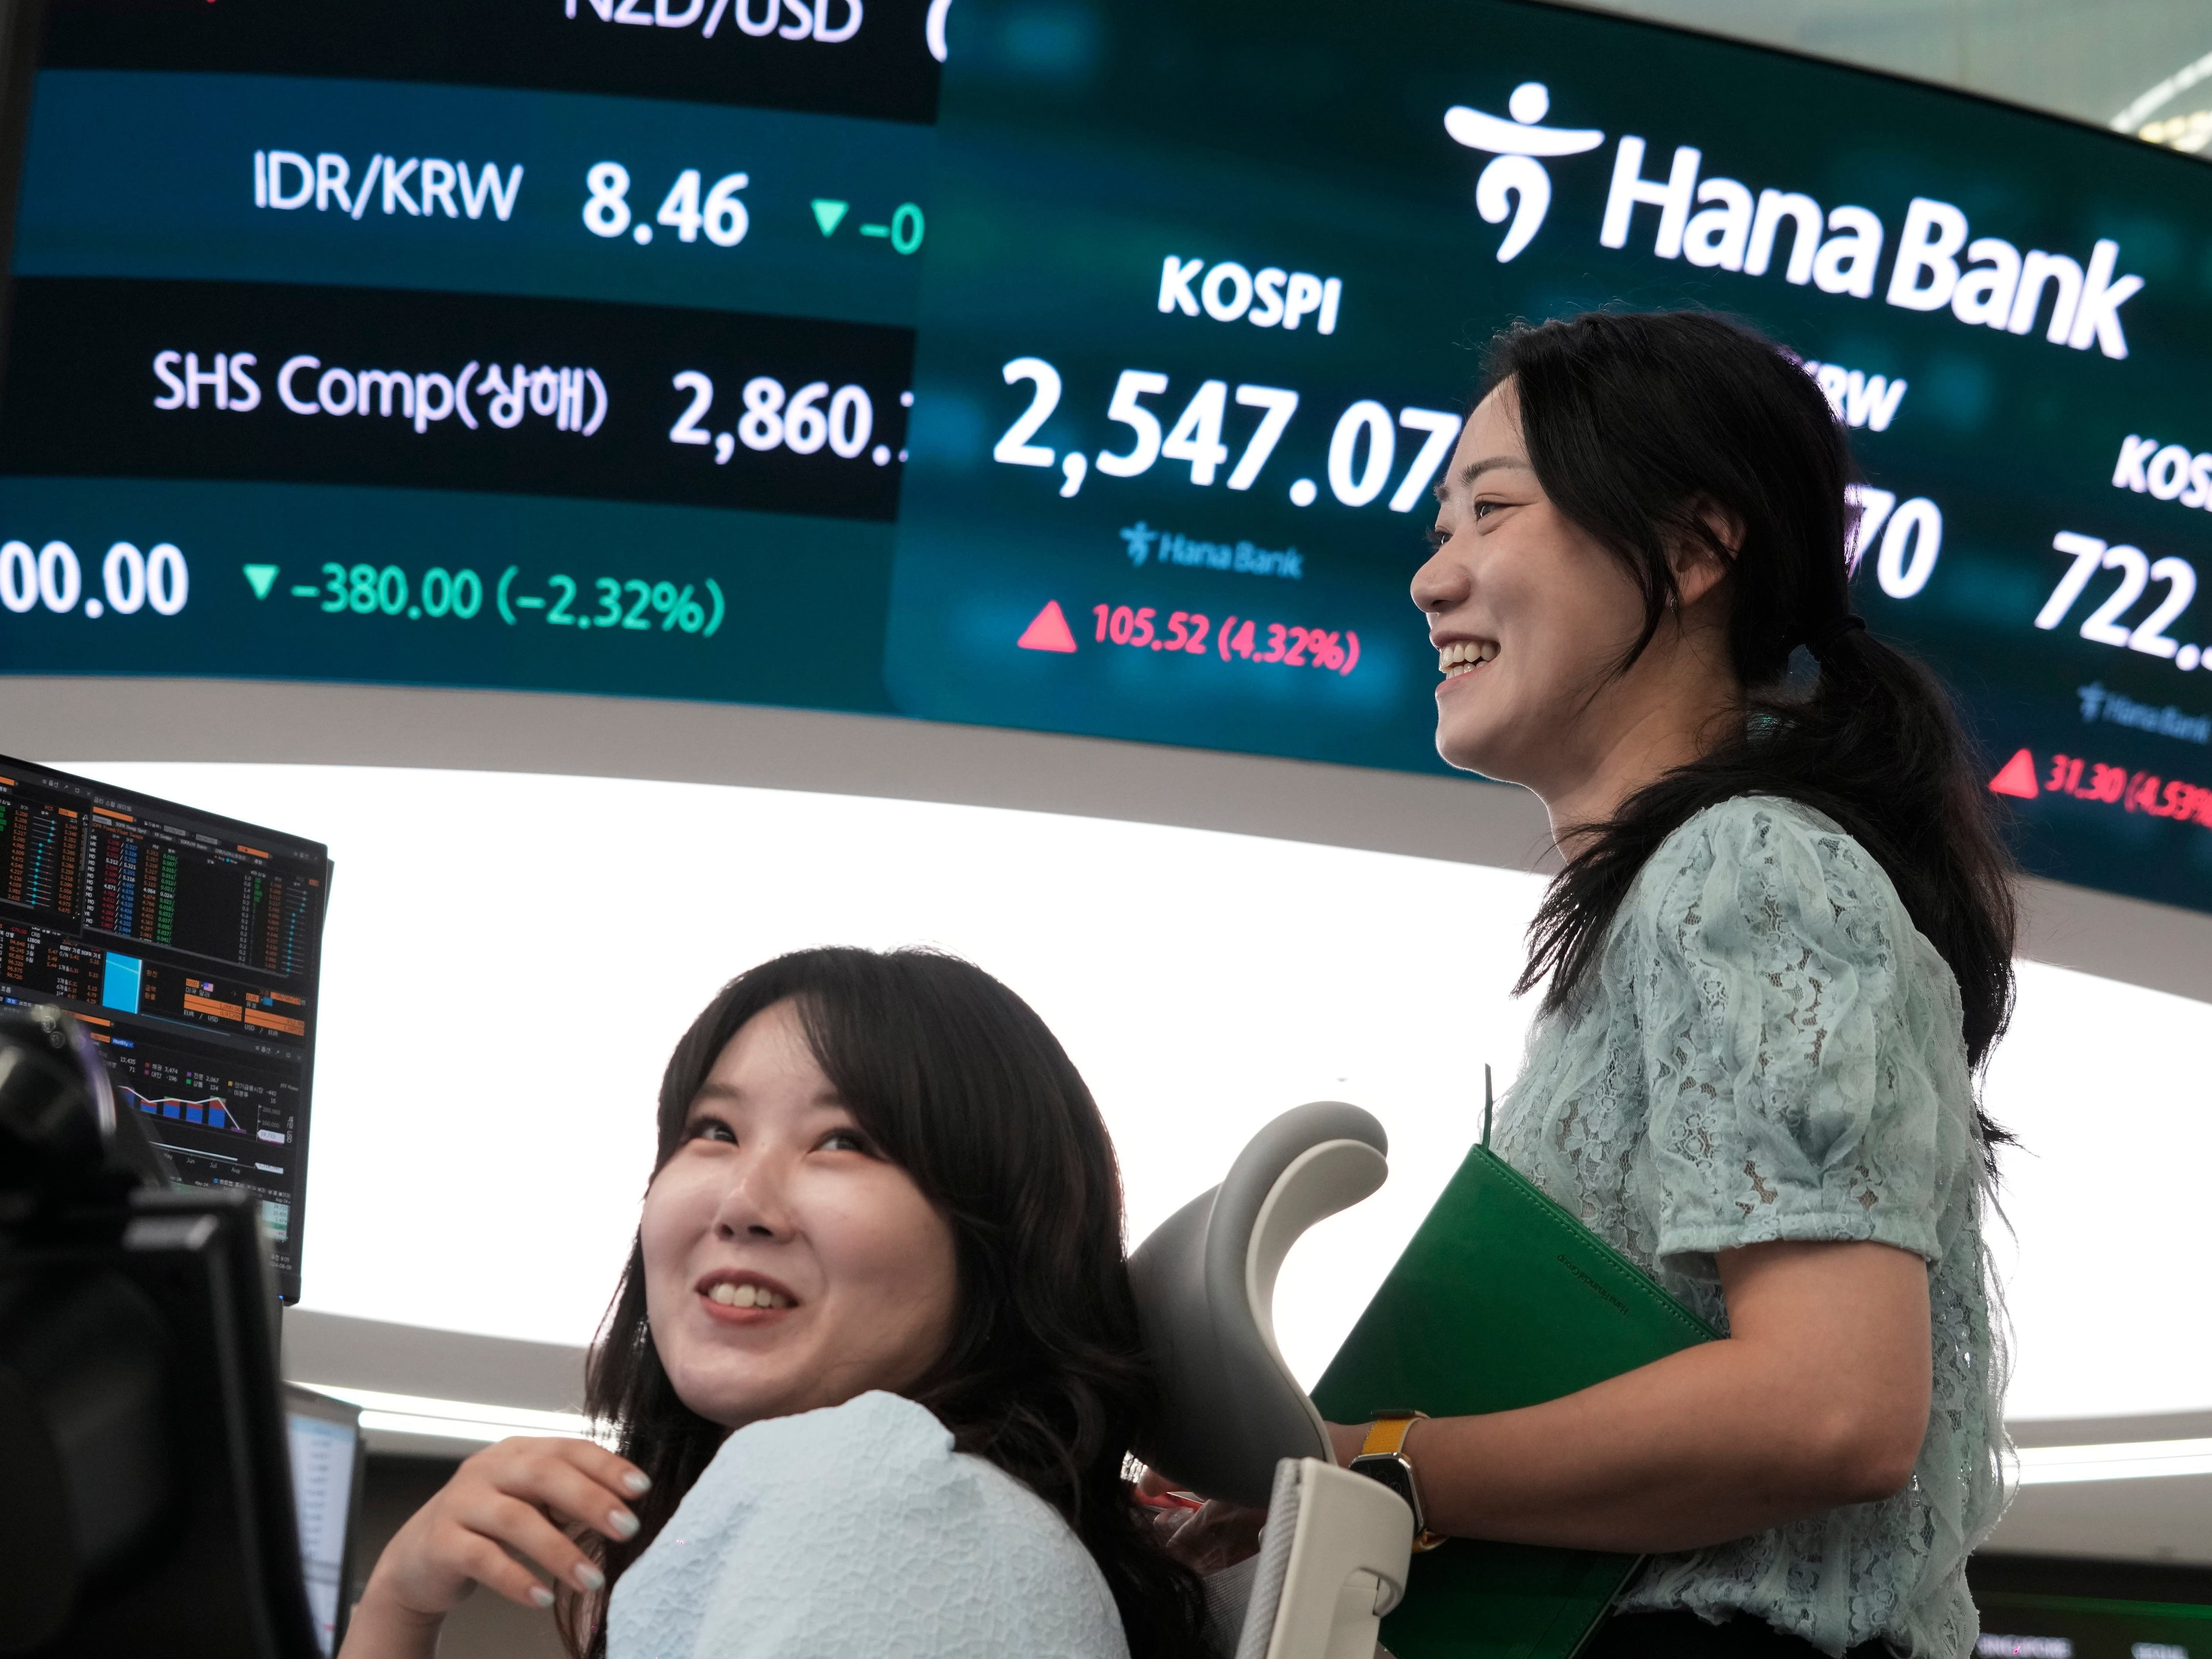 Japanese stocks soar after massive sell-off that shook Wall Street